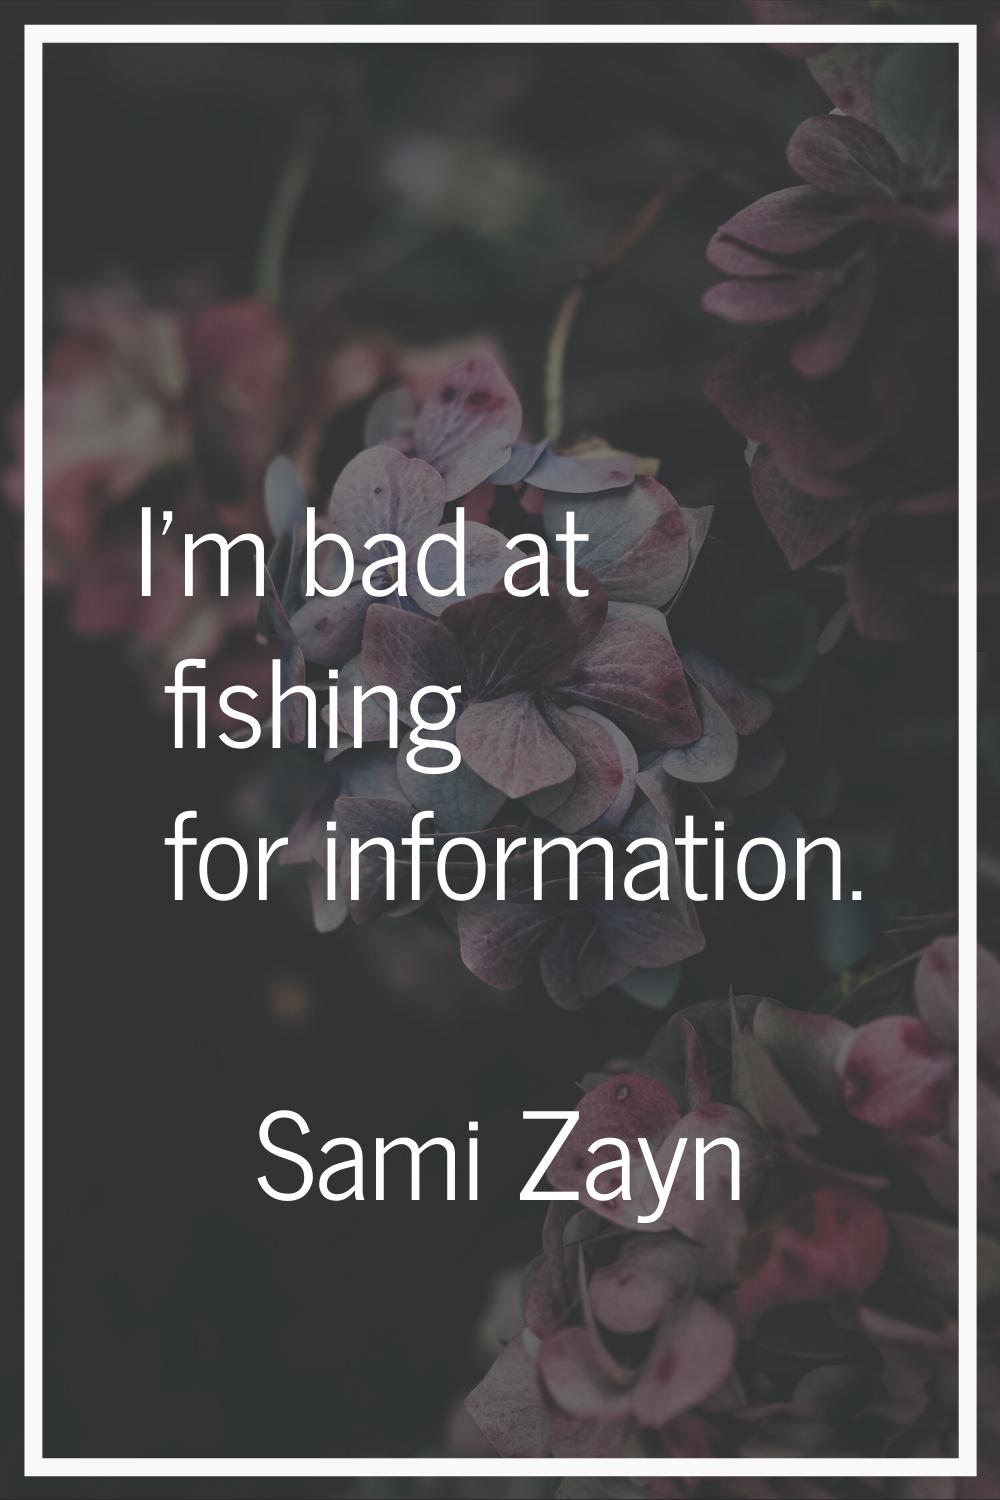 I'm bad at fishing for information.